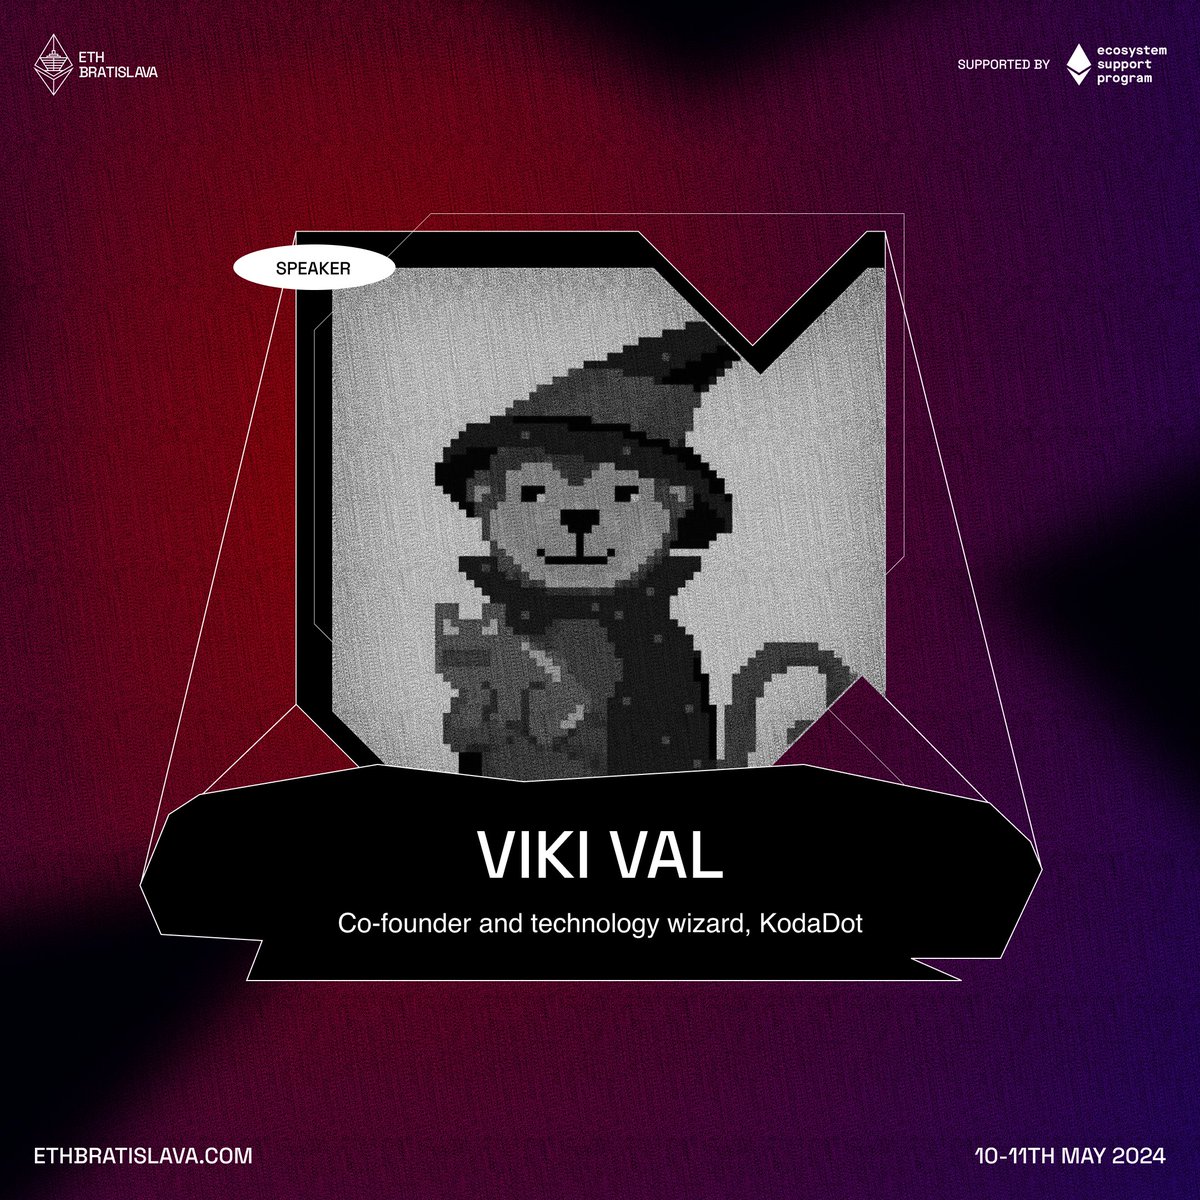 Meet Viki Val @vikiival, Co-Founder and technology wizard at KodaDot, a generative #art marketplace. 🖼️ 

His personal mission is to use innovative #technologies to bring users closer to the blockchain ecosystem.